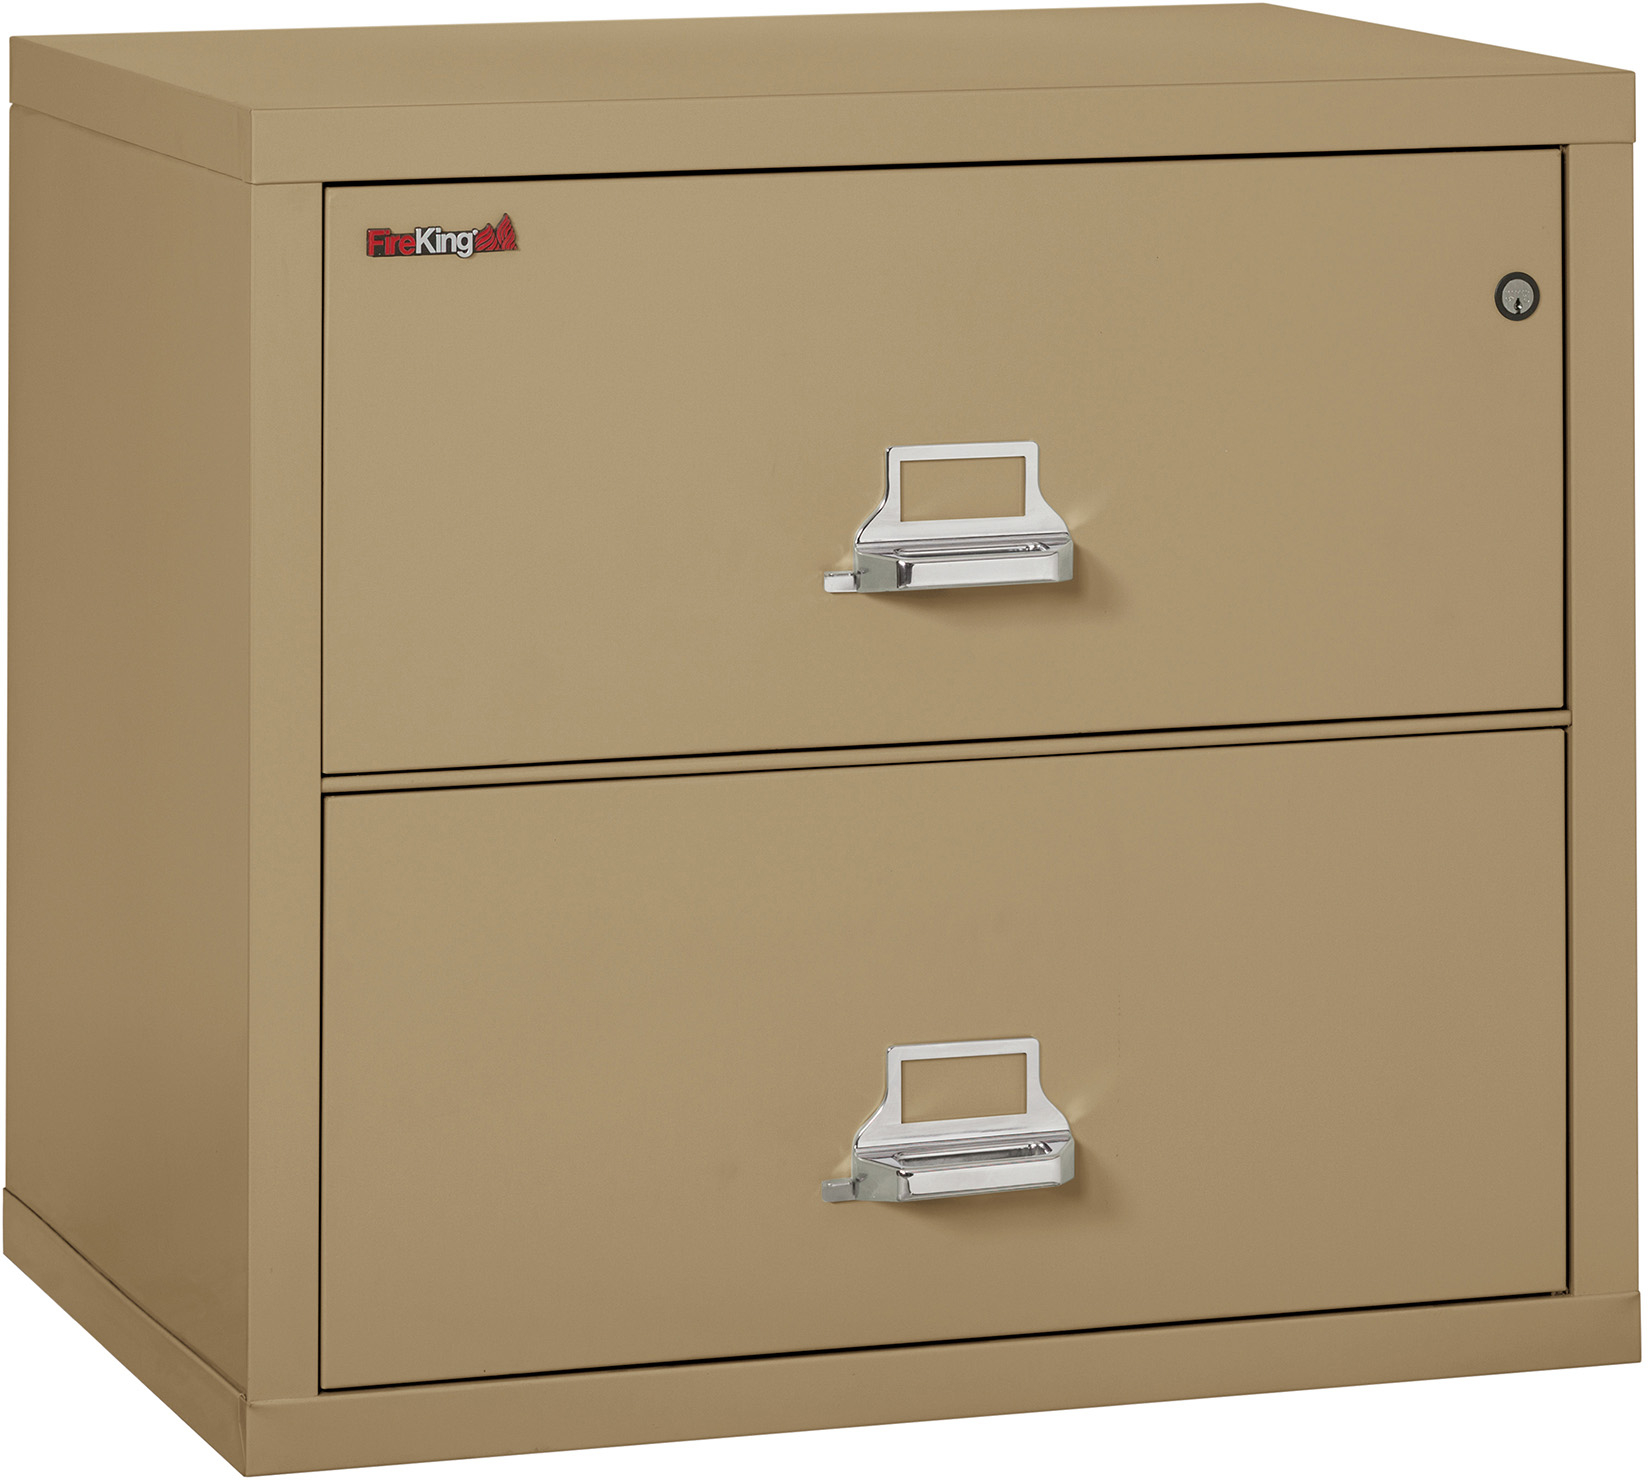 Fireking 2 3122 C 2 Drawer 31 Inch Lateral Fireproof File Keystone intended for sizing 1648 X 1480